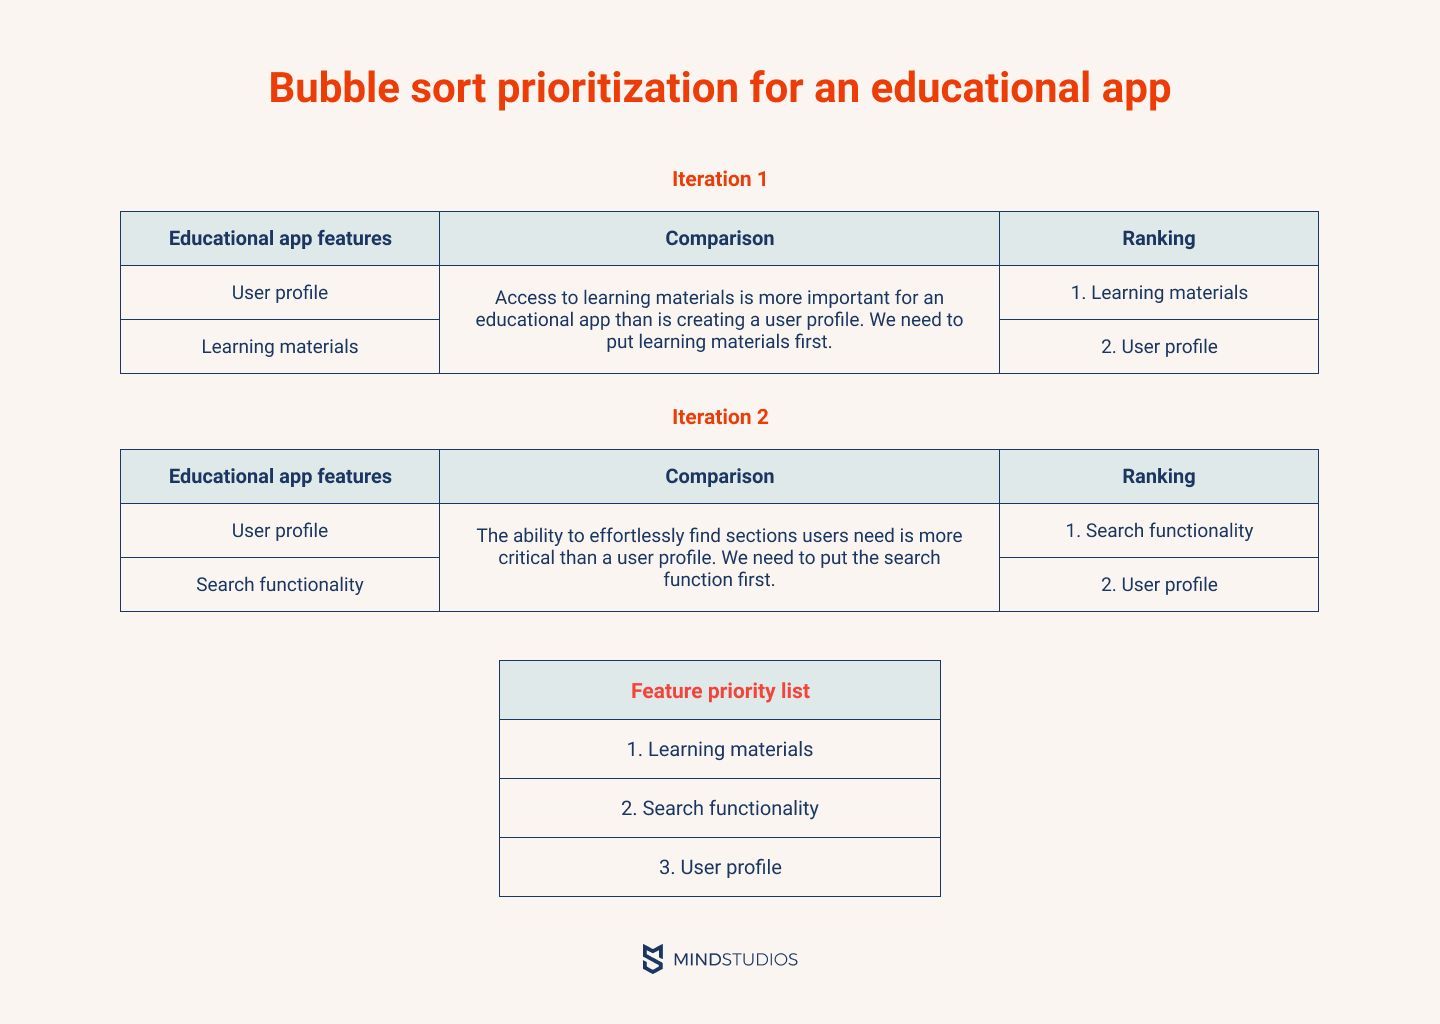 Bubble sort prioritization for an educational app